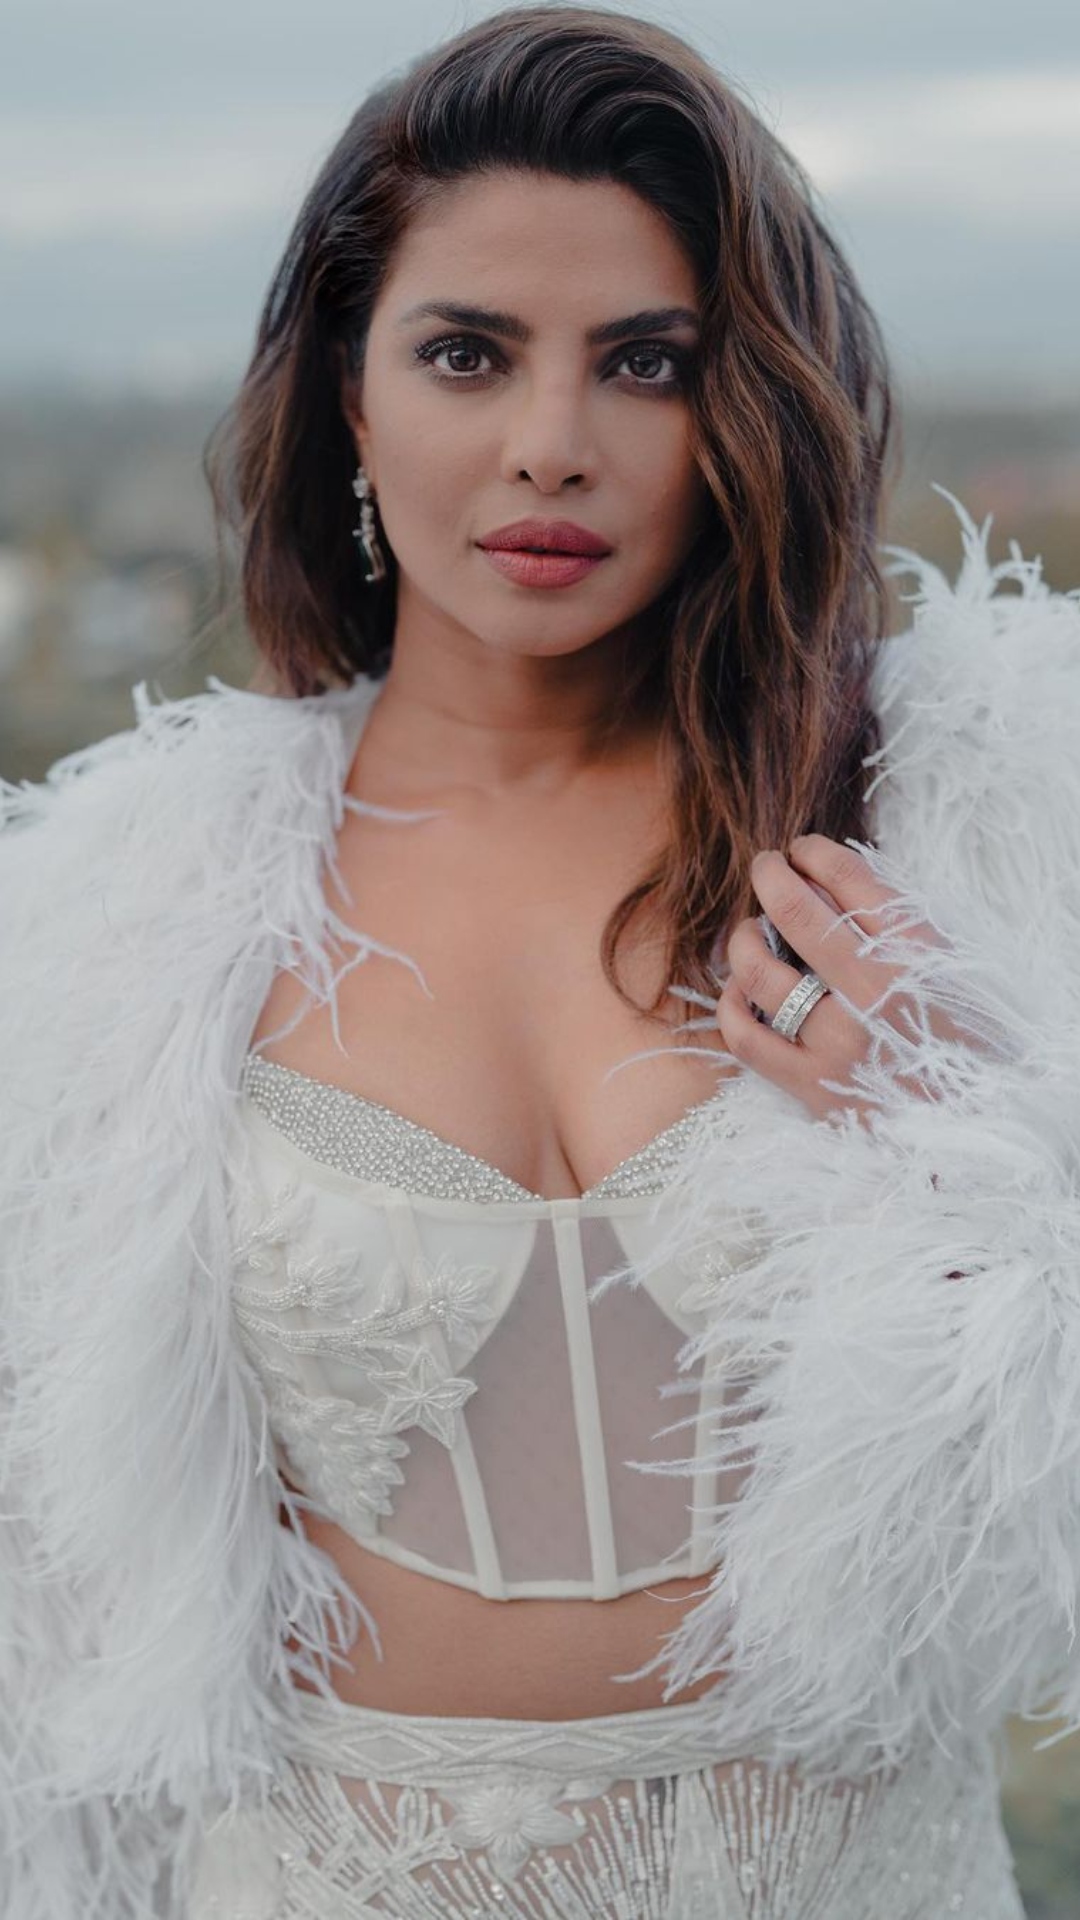 Priyanka Chopra looks breathtaking in a sheer white gown at the Oscars 2023 pre-event